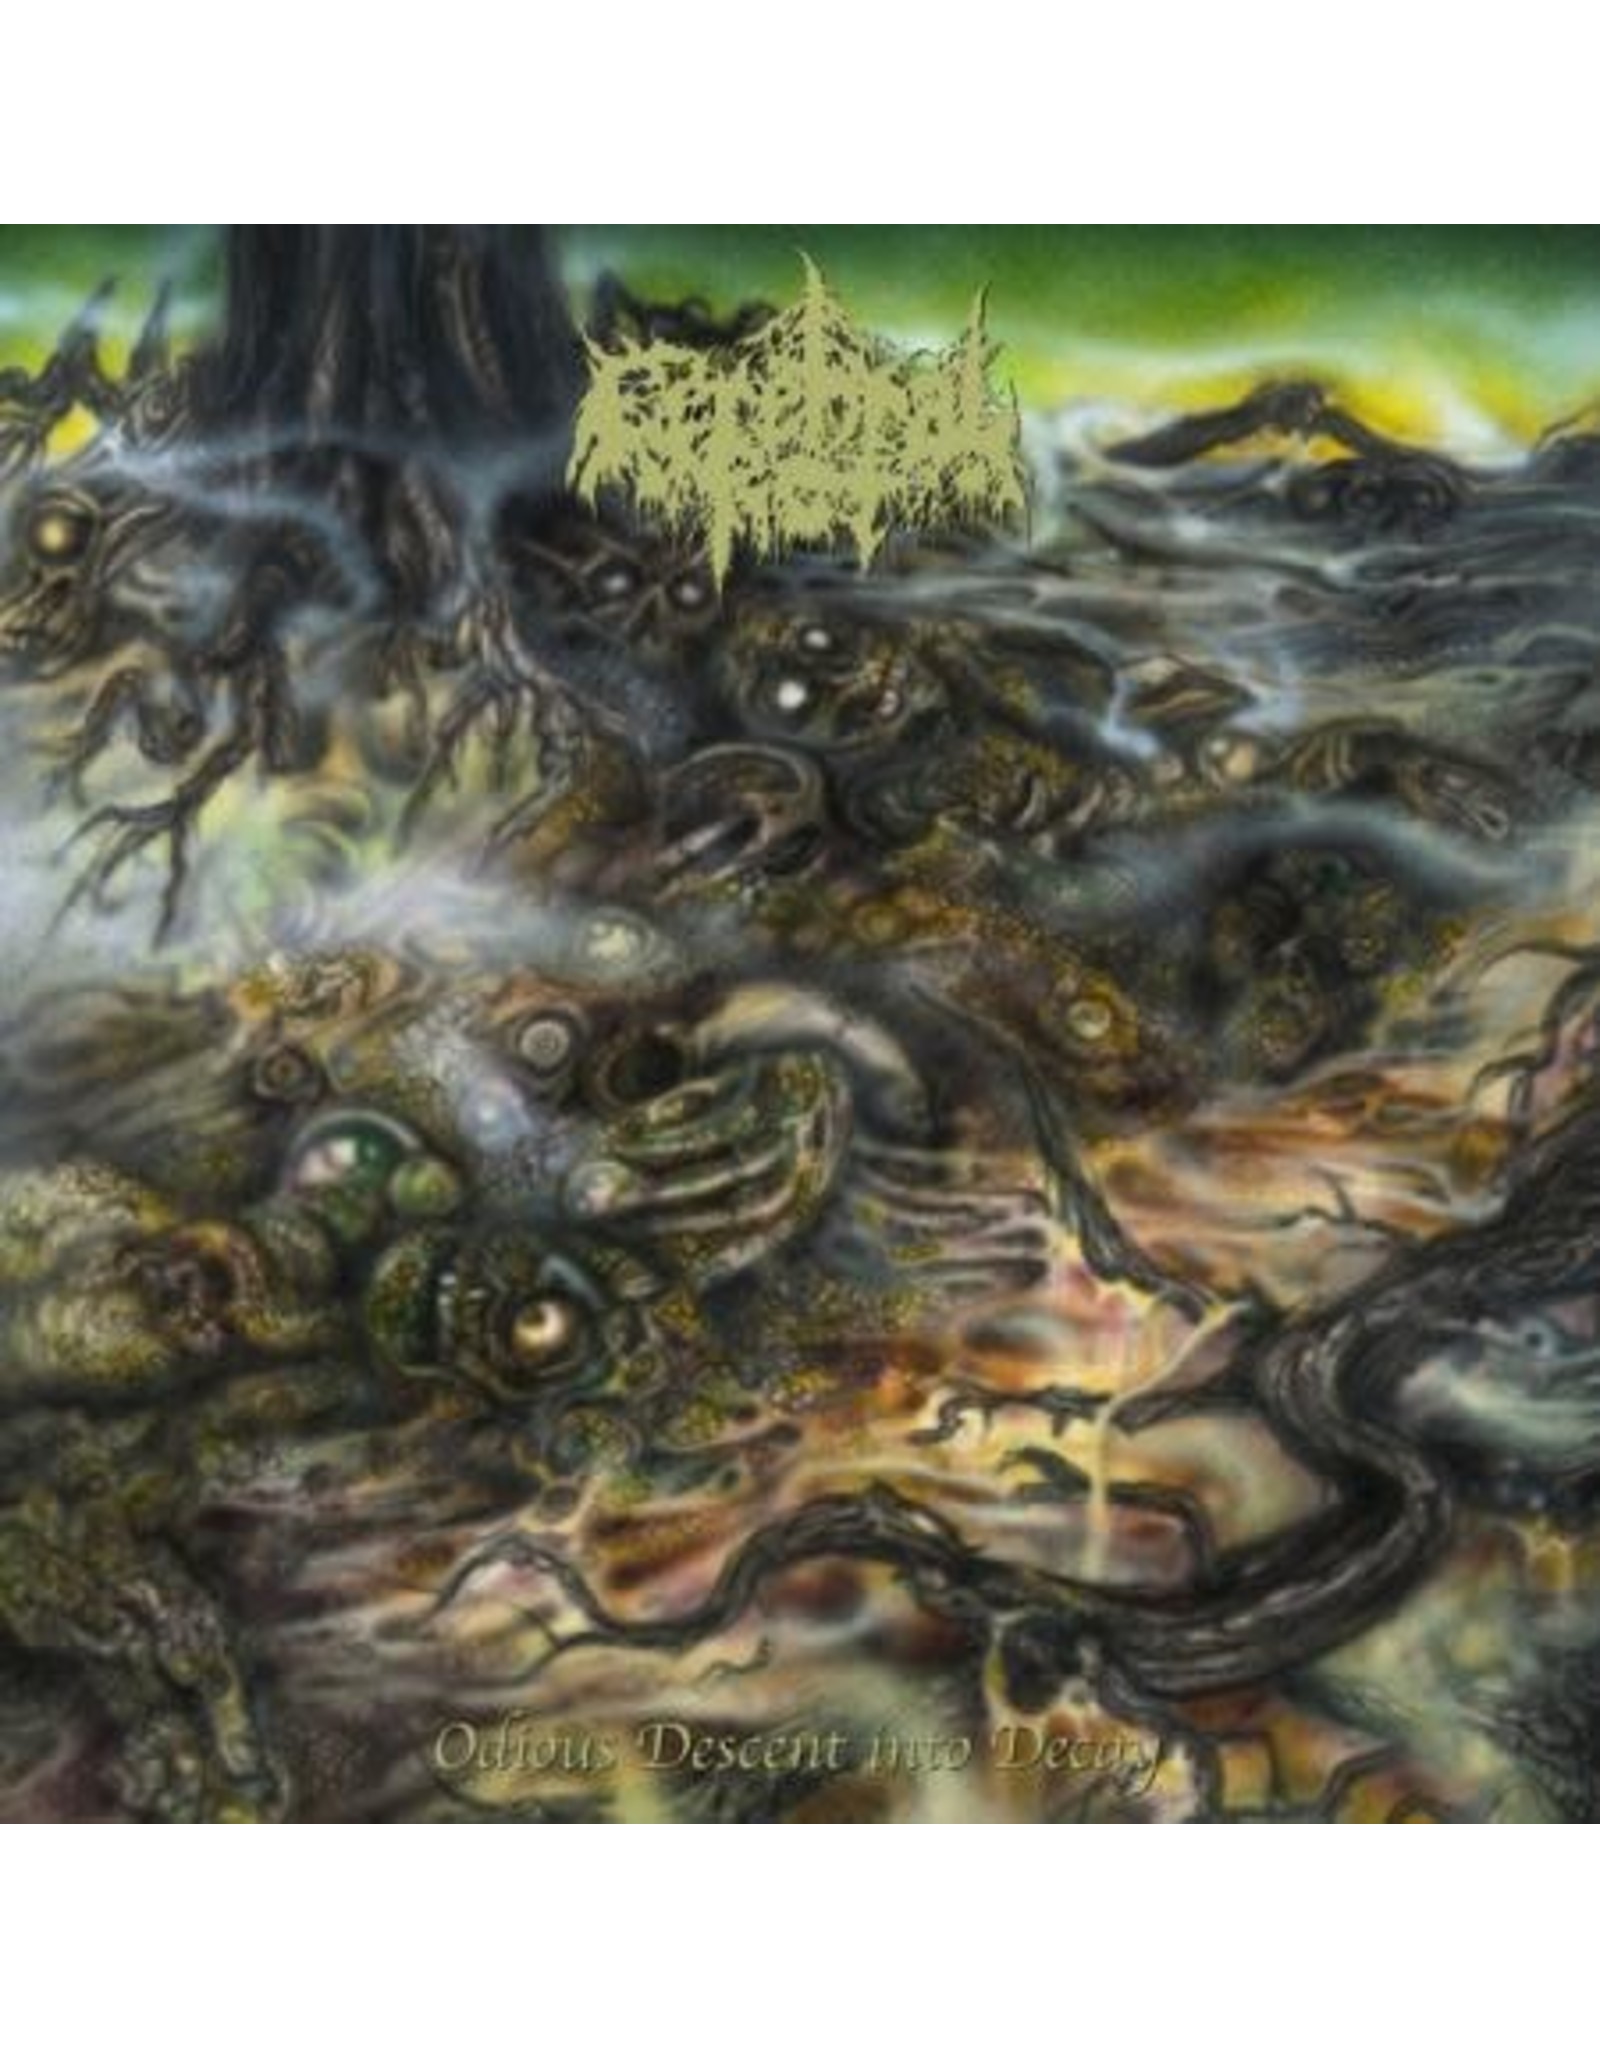 20 Buck Spin Cerebral Rot: Odious Descent into Decay (colored)  LP